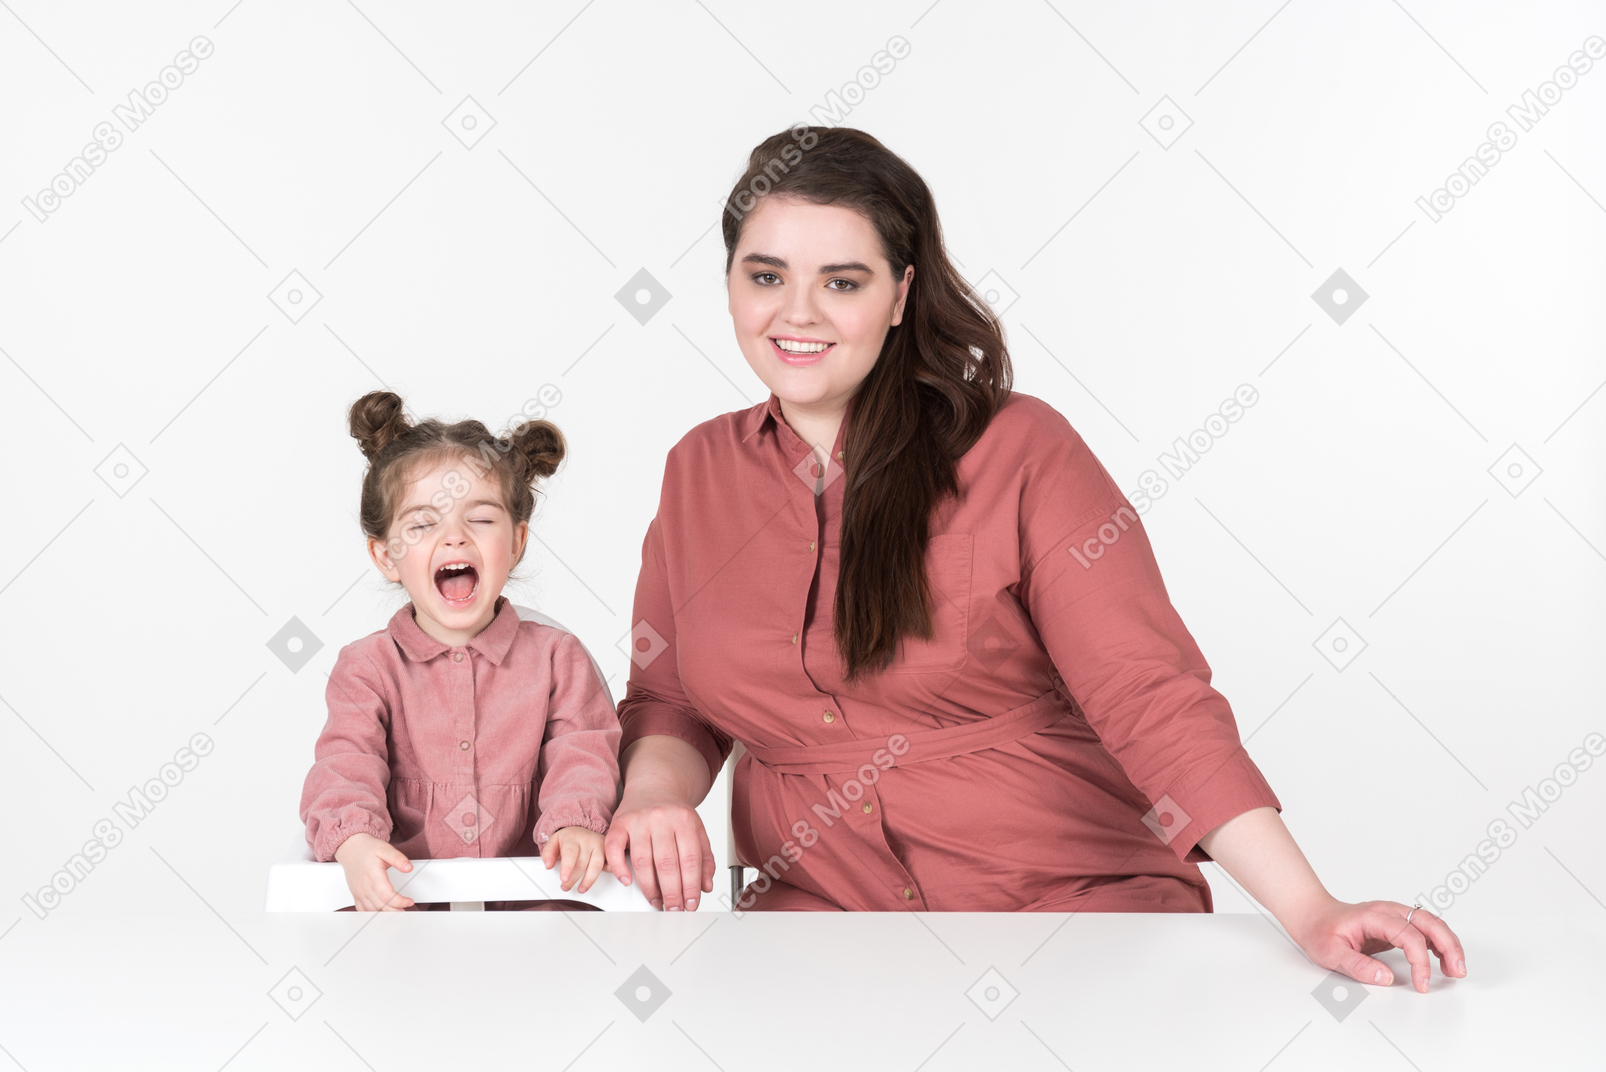 Mother and her little daughter, wearing red and pink clothes, having fun at the dinner table